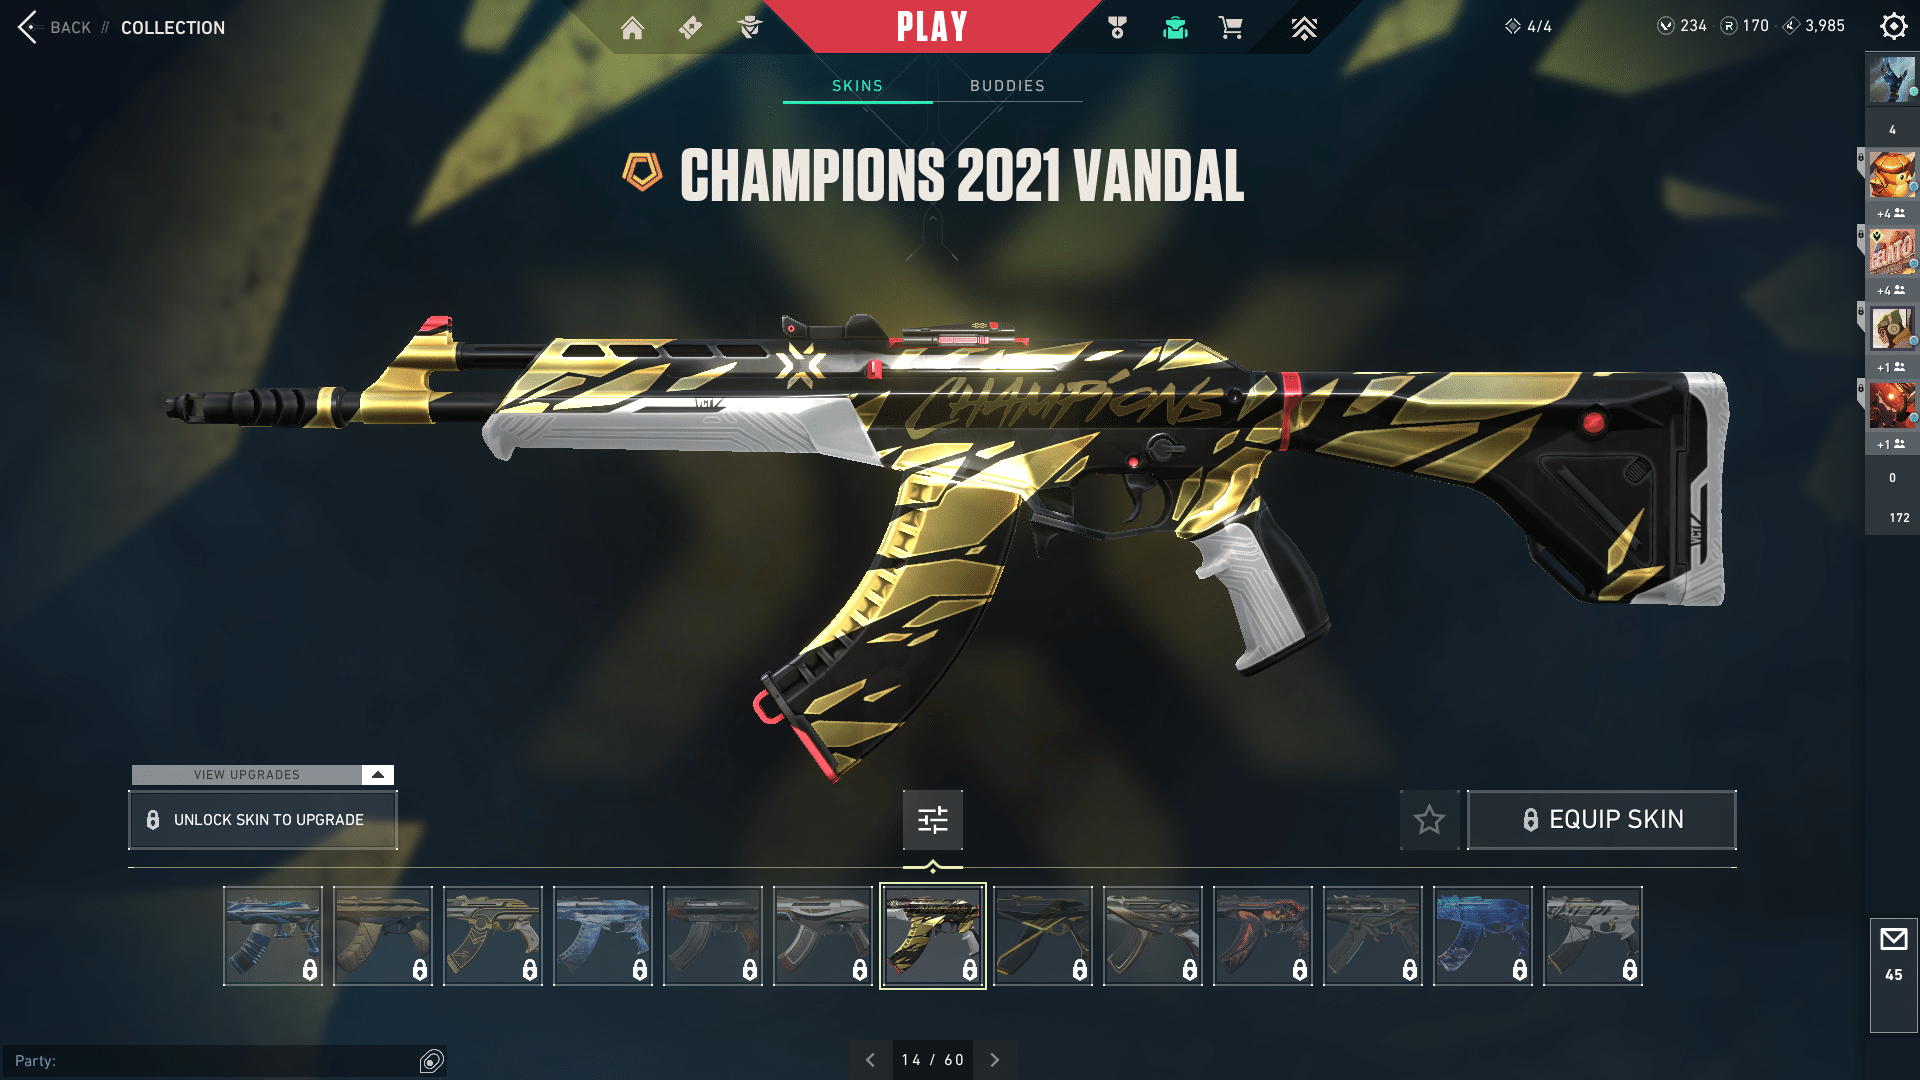 Champions Vandal 2020 skin (Top 5 most overrated skin)